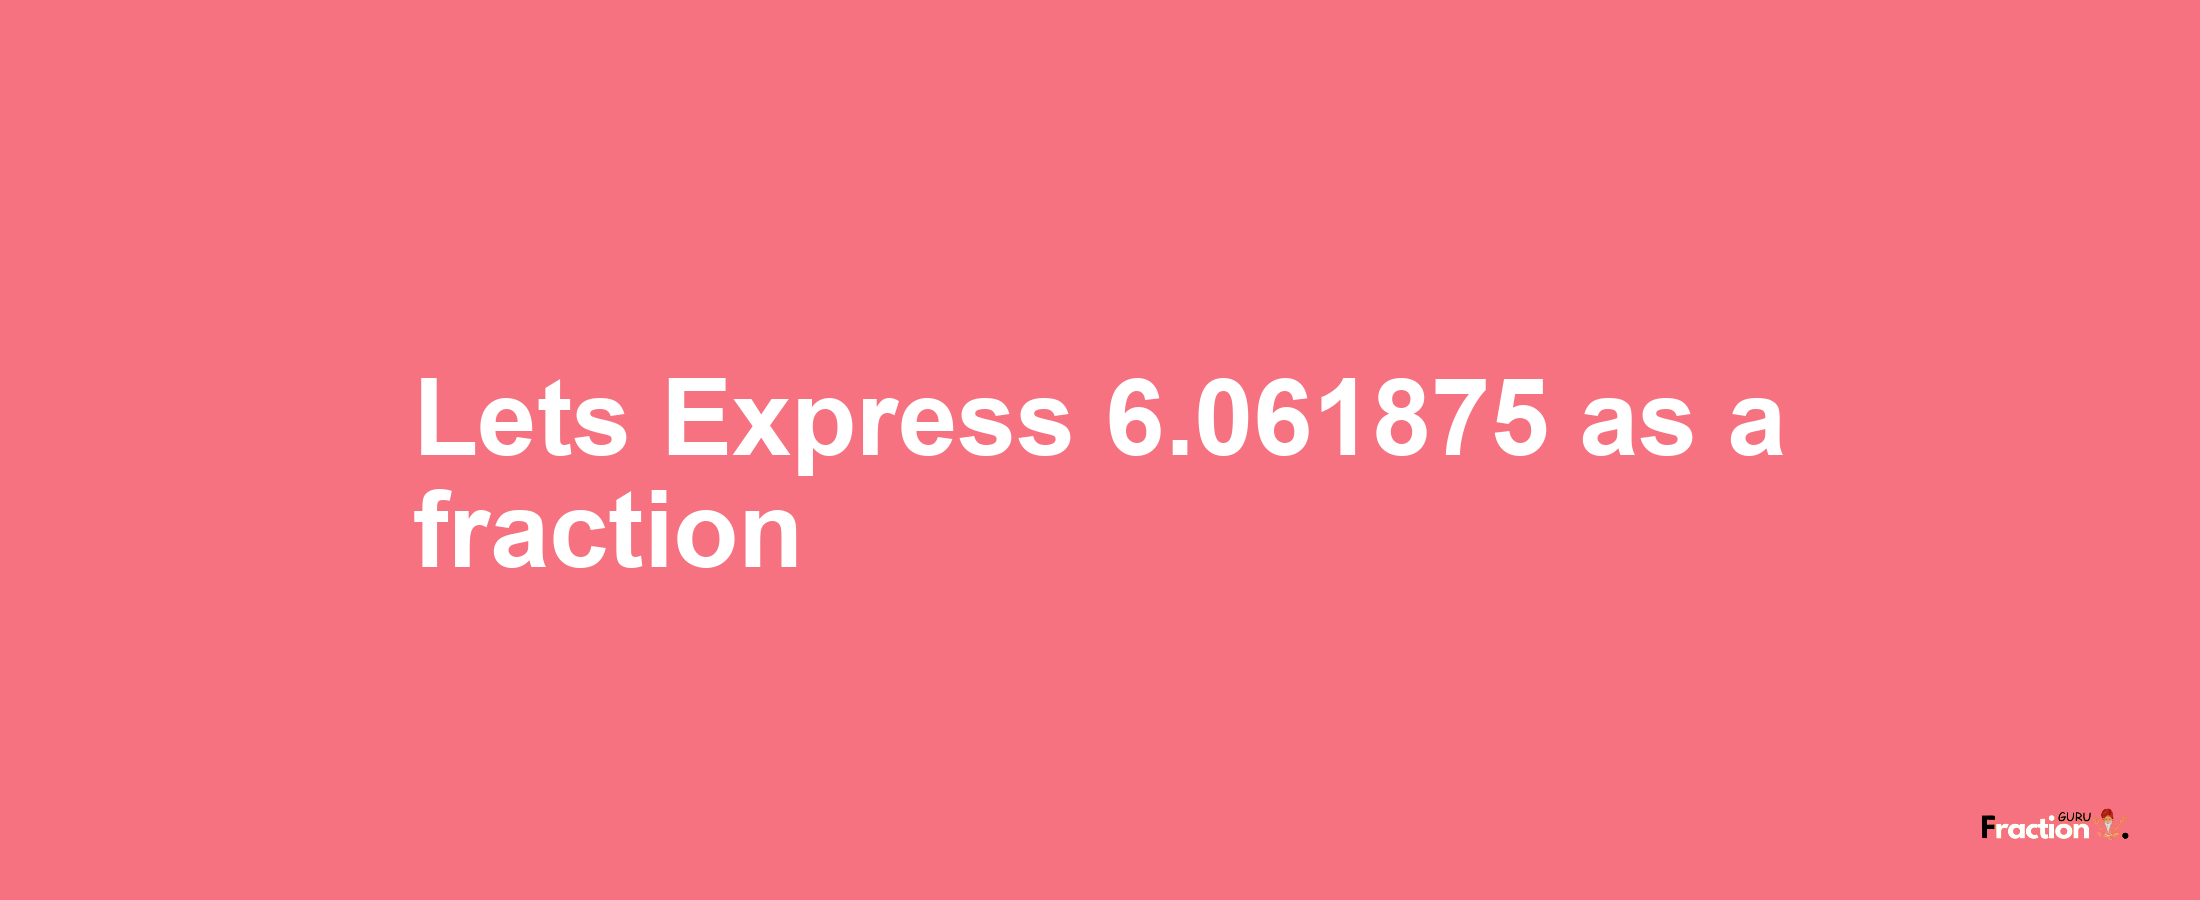 Lets Express 6.061875 as afraction